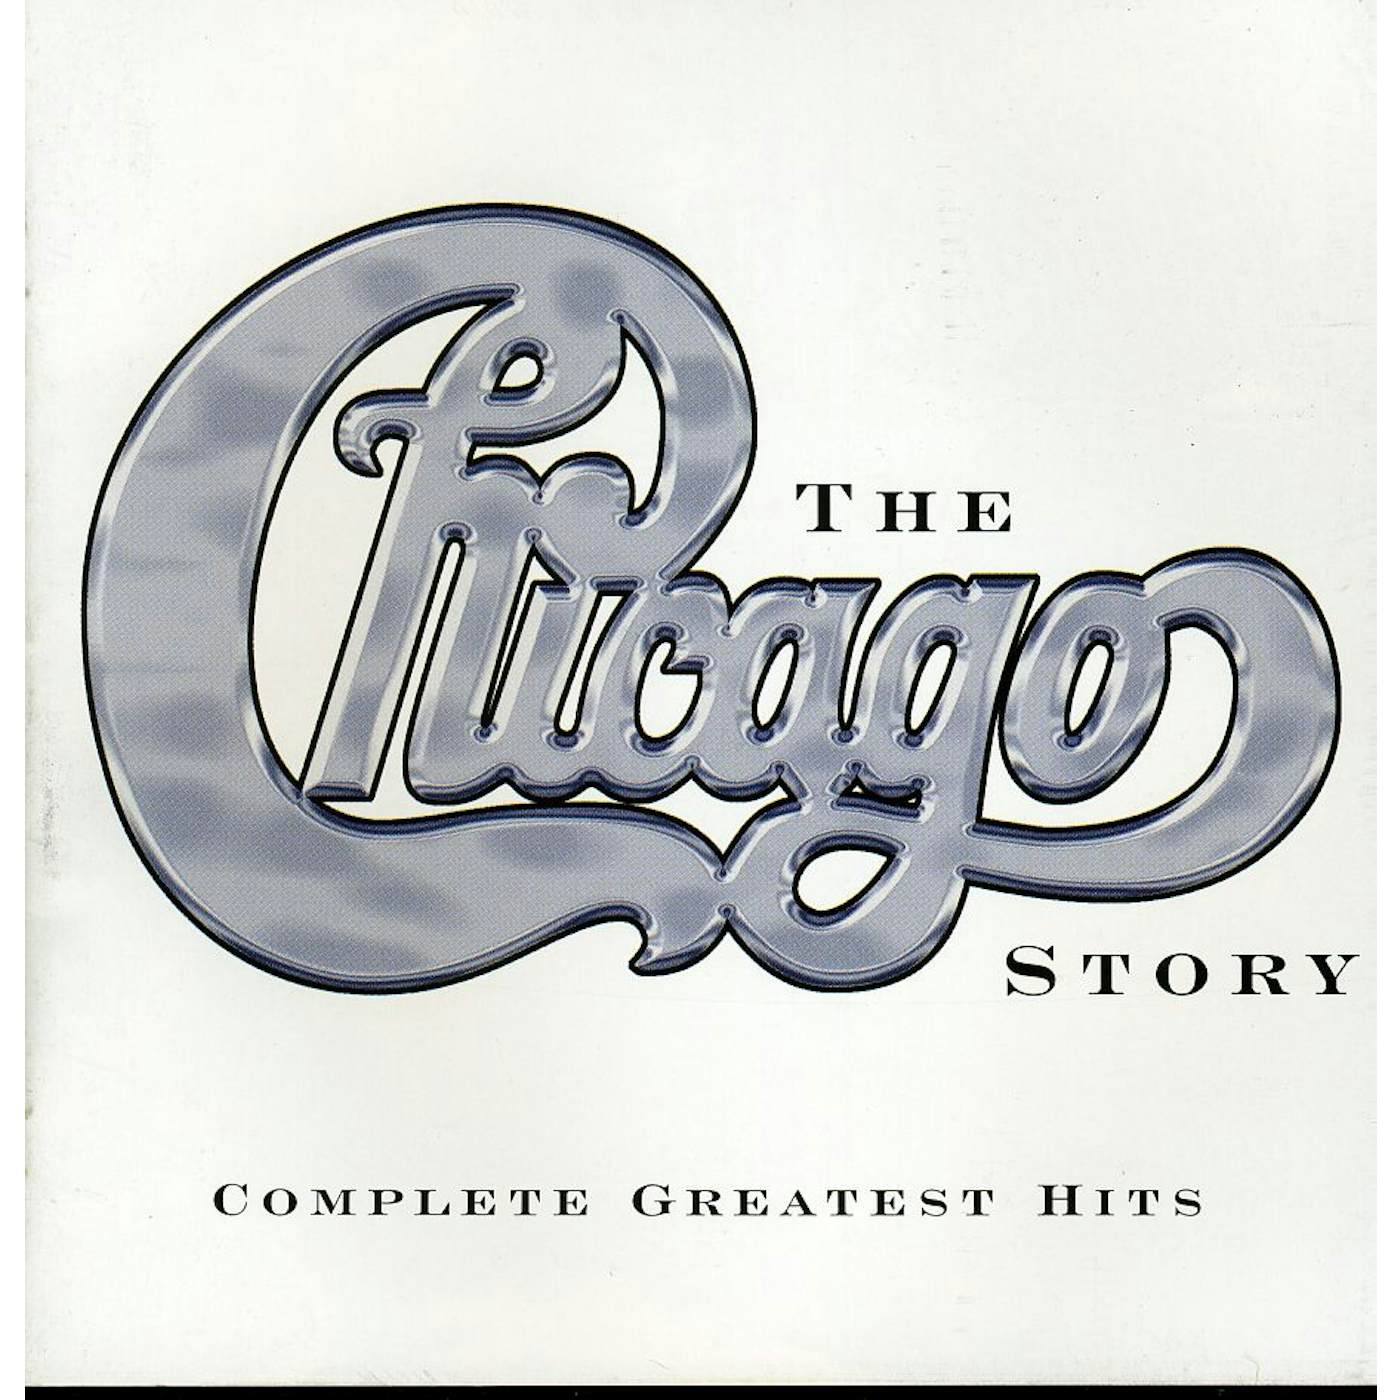 CHICAGO STORY: COMPLETE G.H. 1967-2002 CD